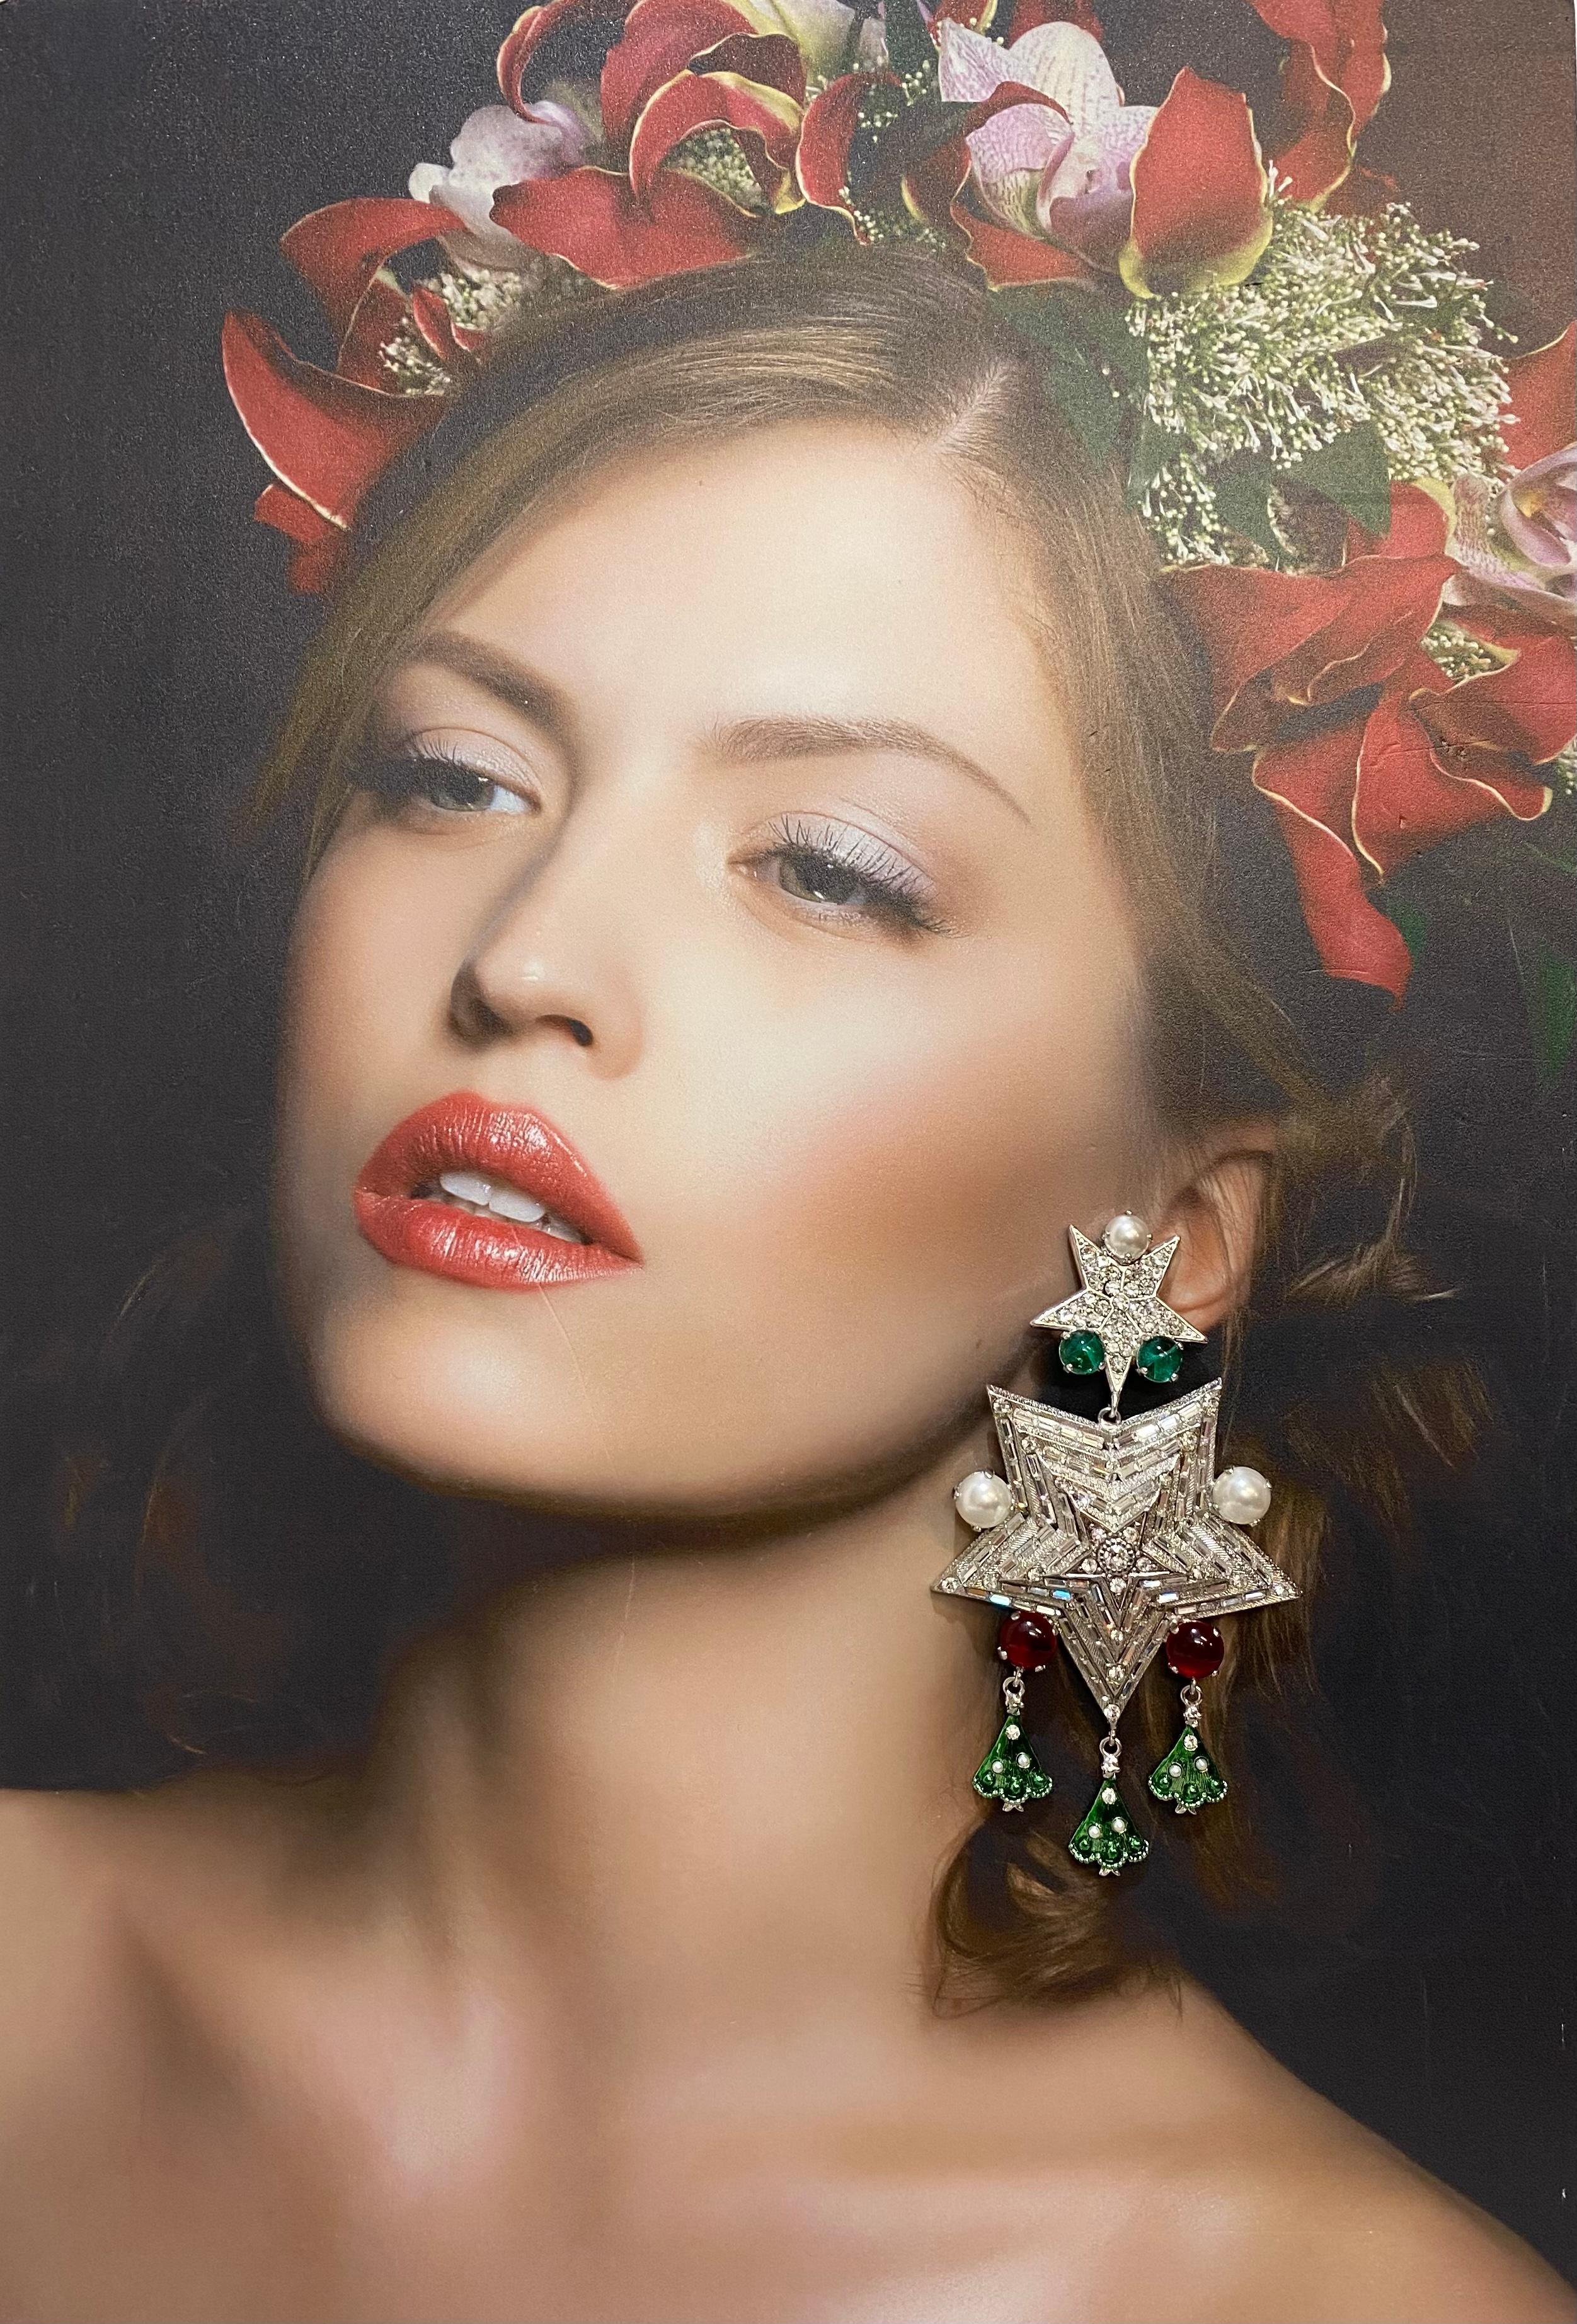 Amazing and funny Christmas earrings by Carlo Zini
One of the greatest world bijoux designer
Christmas theme
Non allergenic rhodium
Cm 12 (4,72 inches)
Amazing hand creation of class A Swarovski crystals colored resins
Clip on closure, pierced on